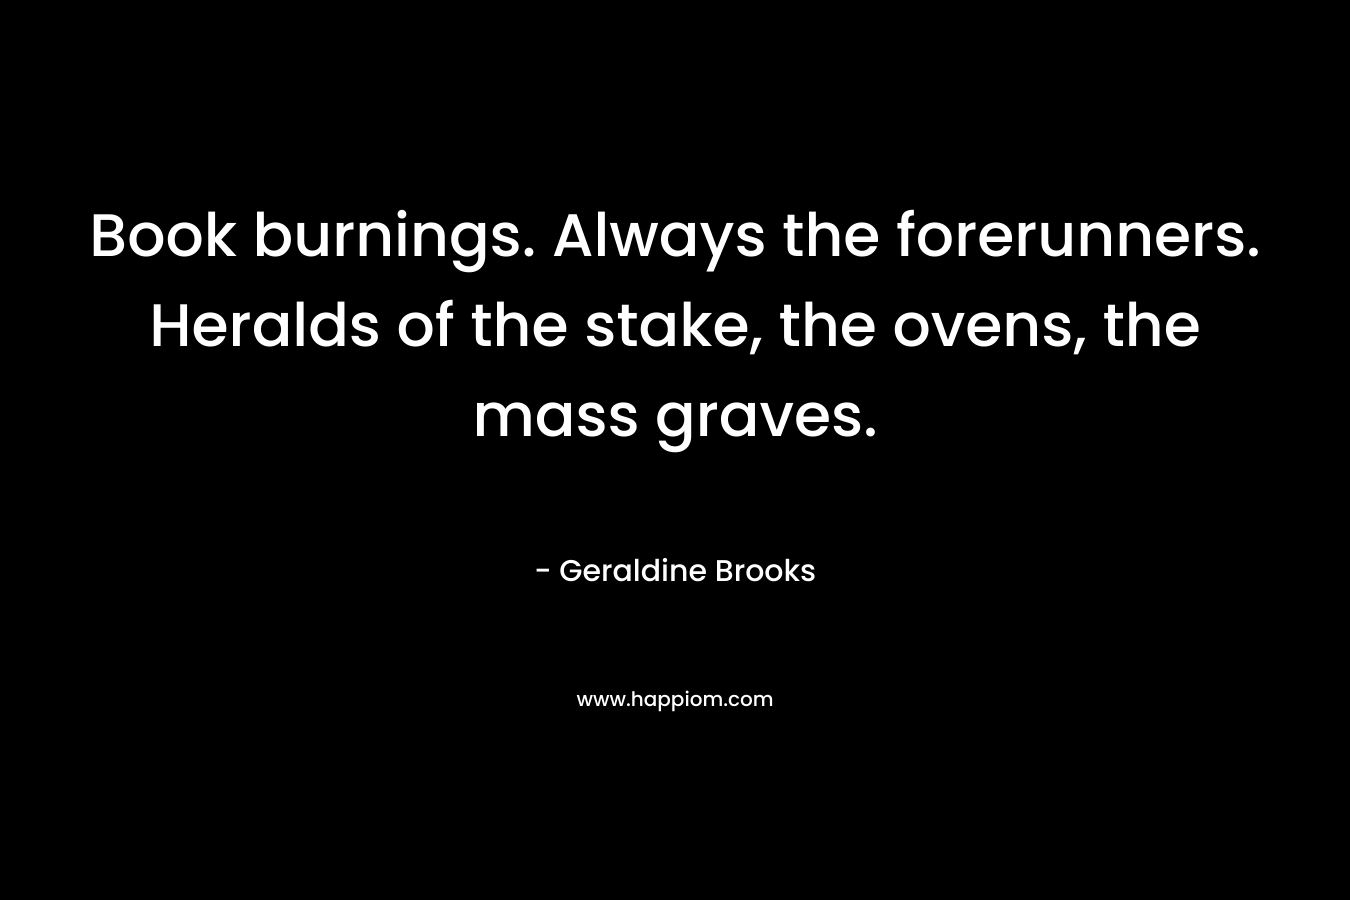 Book burnings. Always the forerunners. Heralds of the stake, the ovens, the mass graves. – Geraldine Brooks